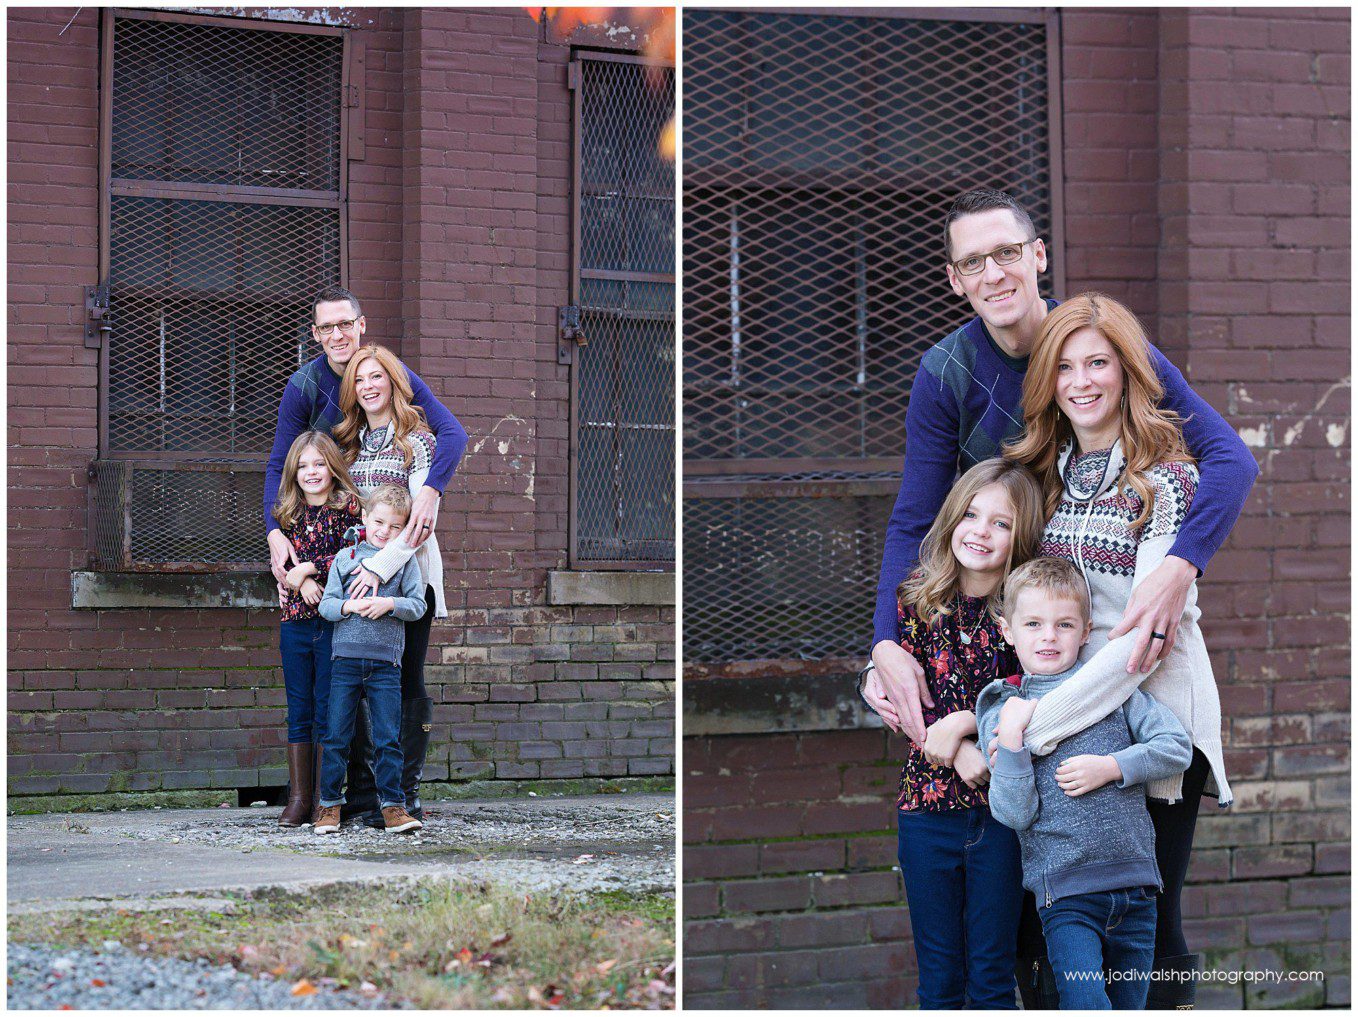 collage of Strip District family portraits.  Images of mom and kids with dad wrapping them all in a big hug while standing in an alley way.